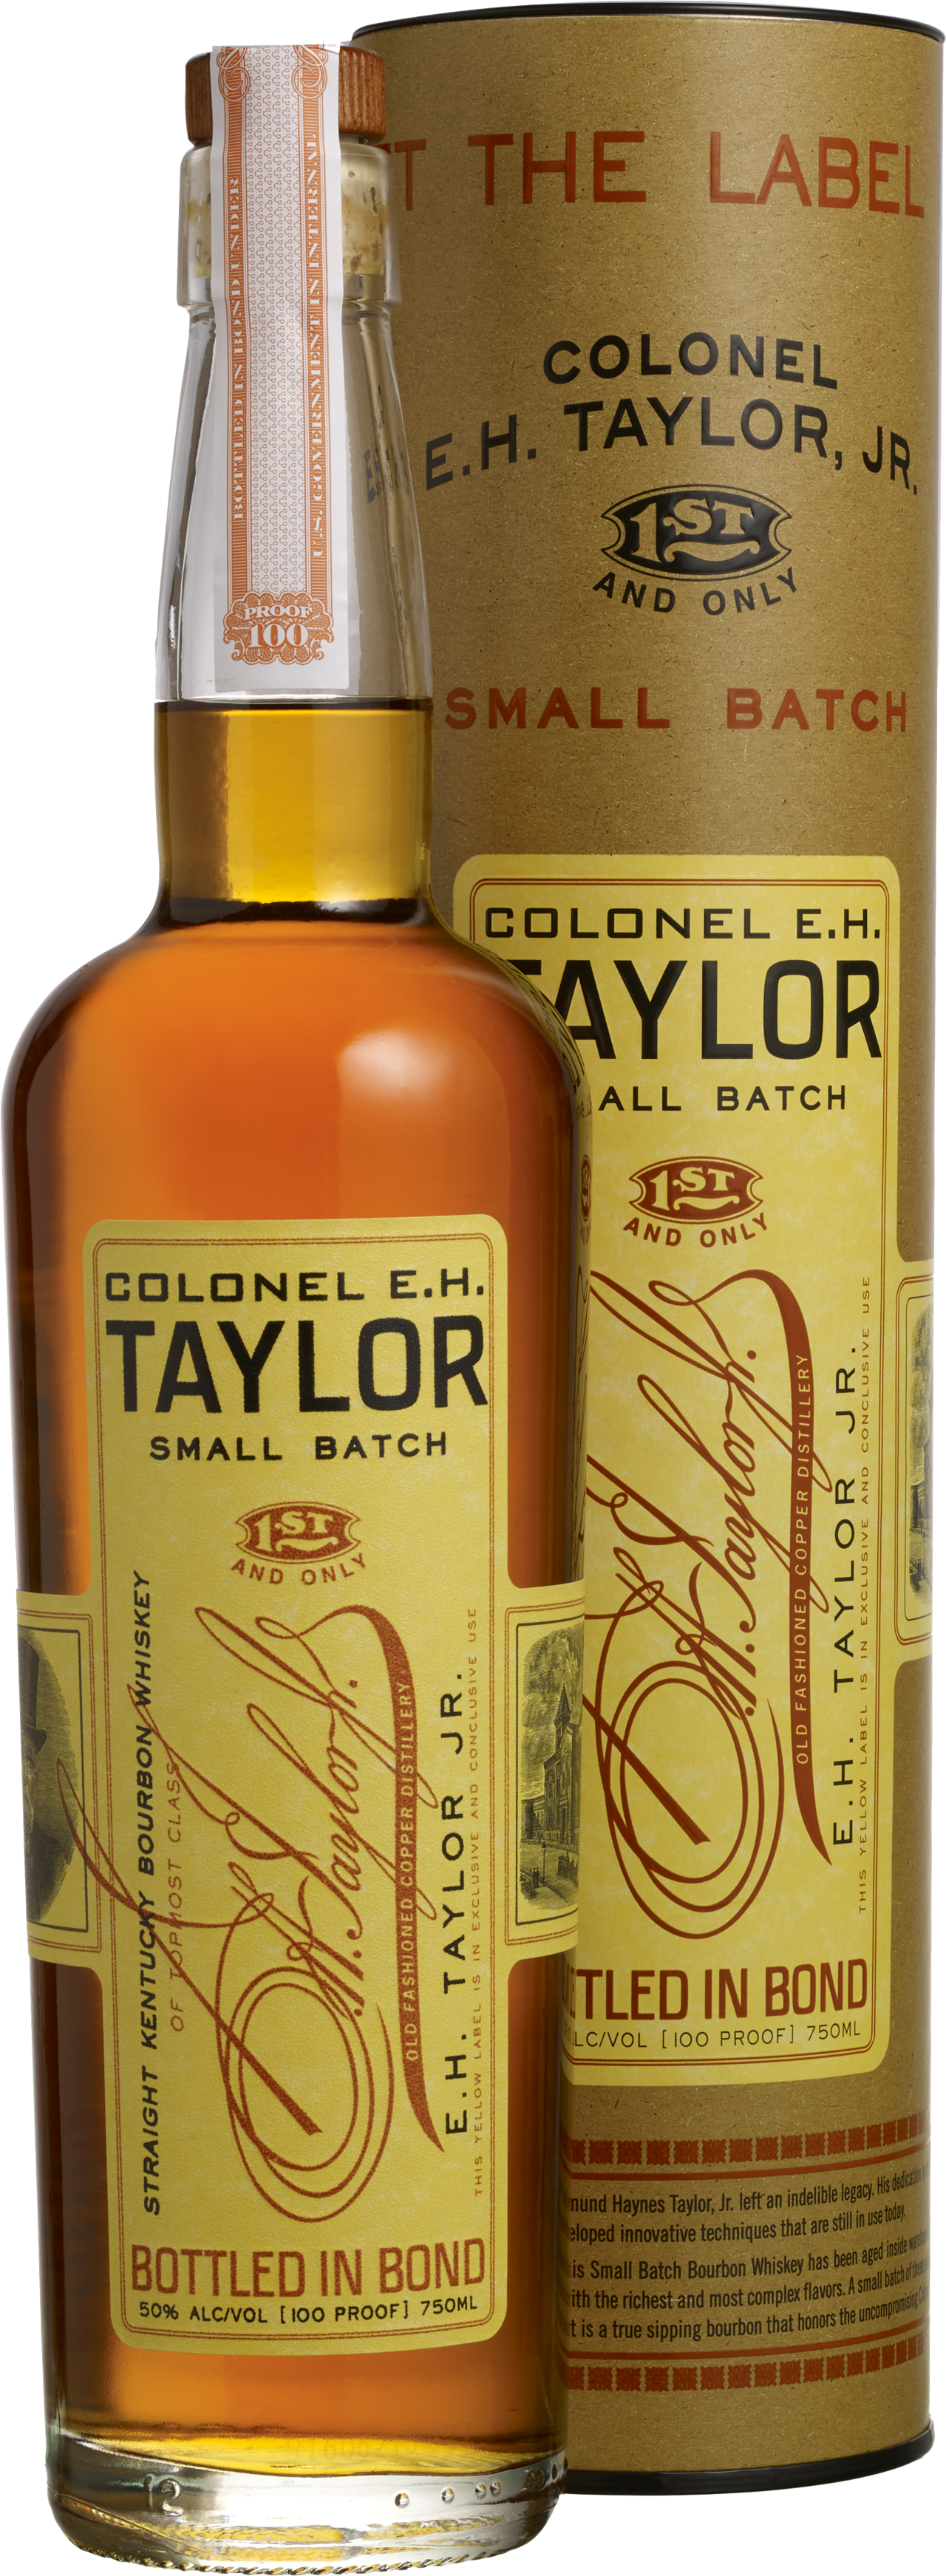 E H Taylor Small Batch with Canister